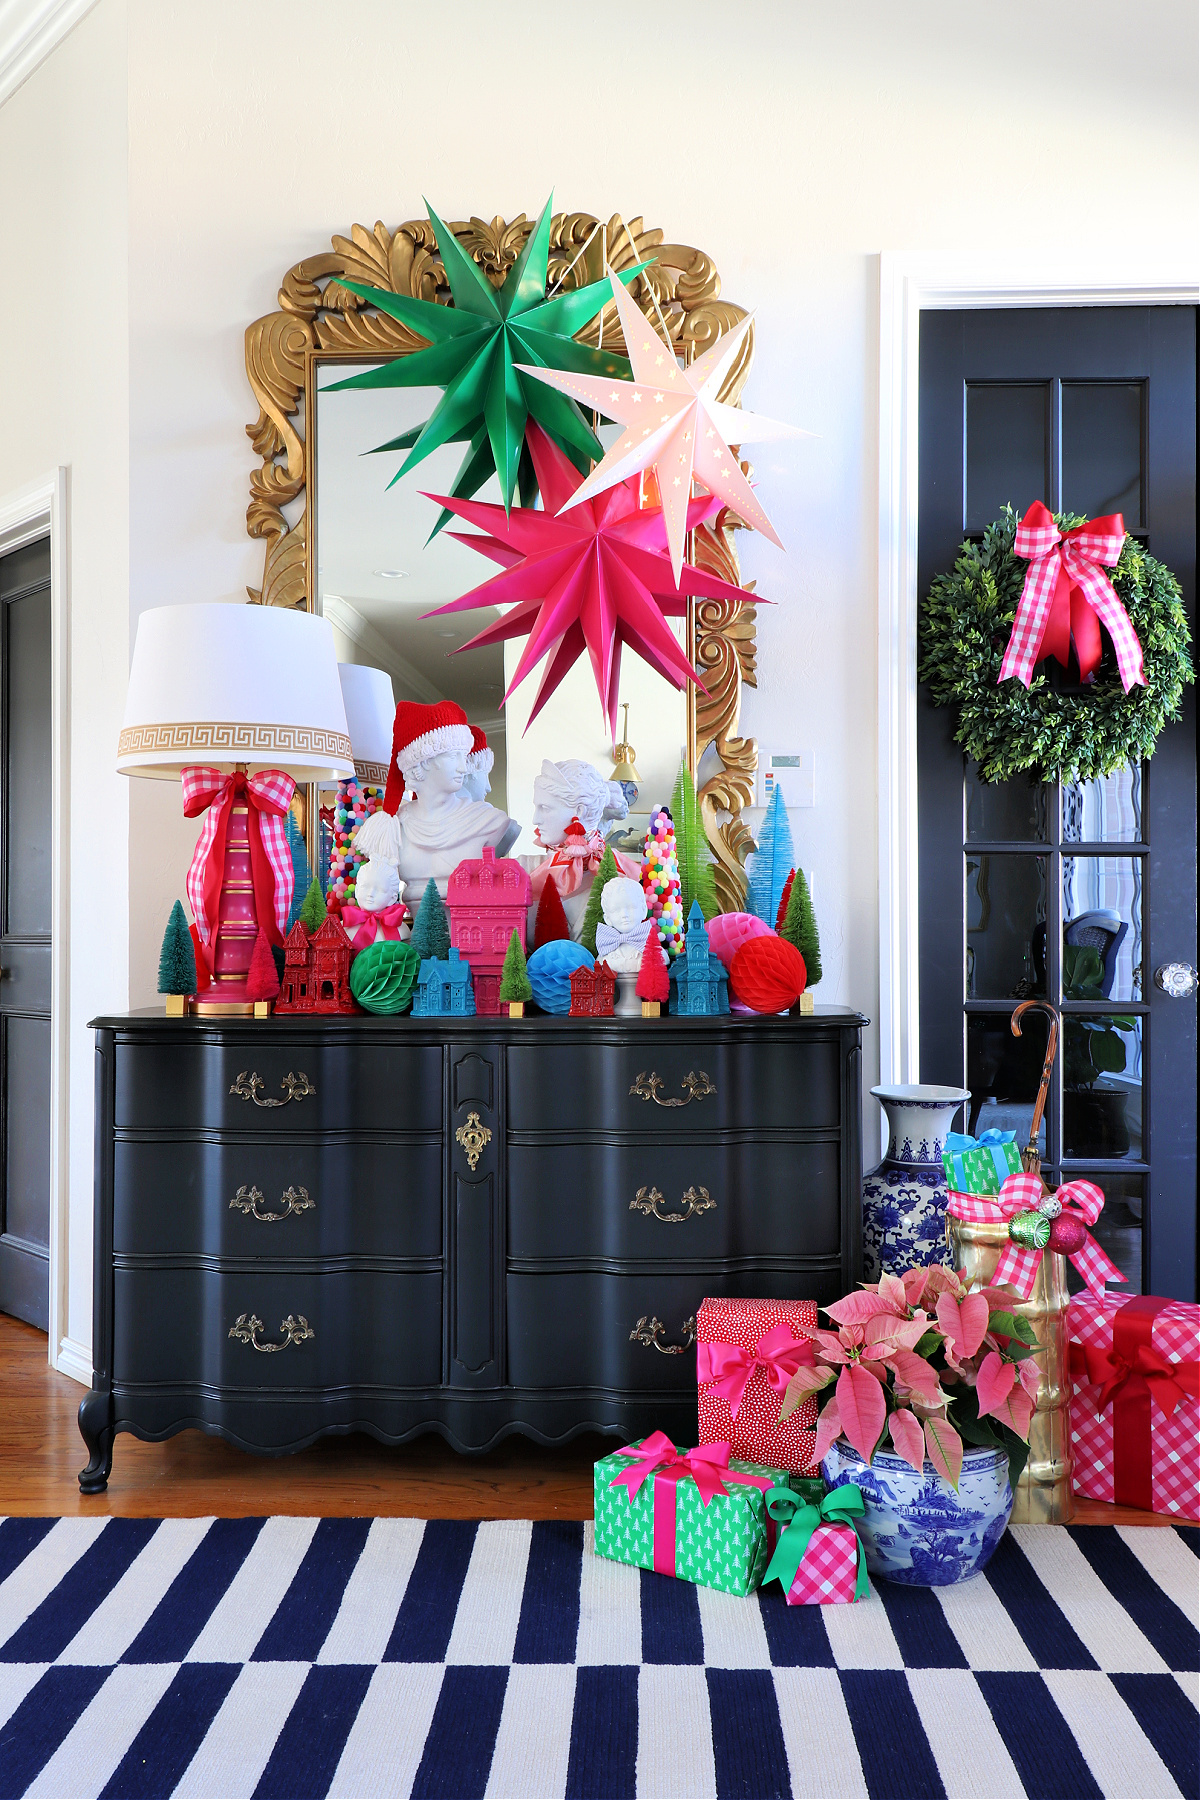 DIY painted paper stars for Christmas are stunning!